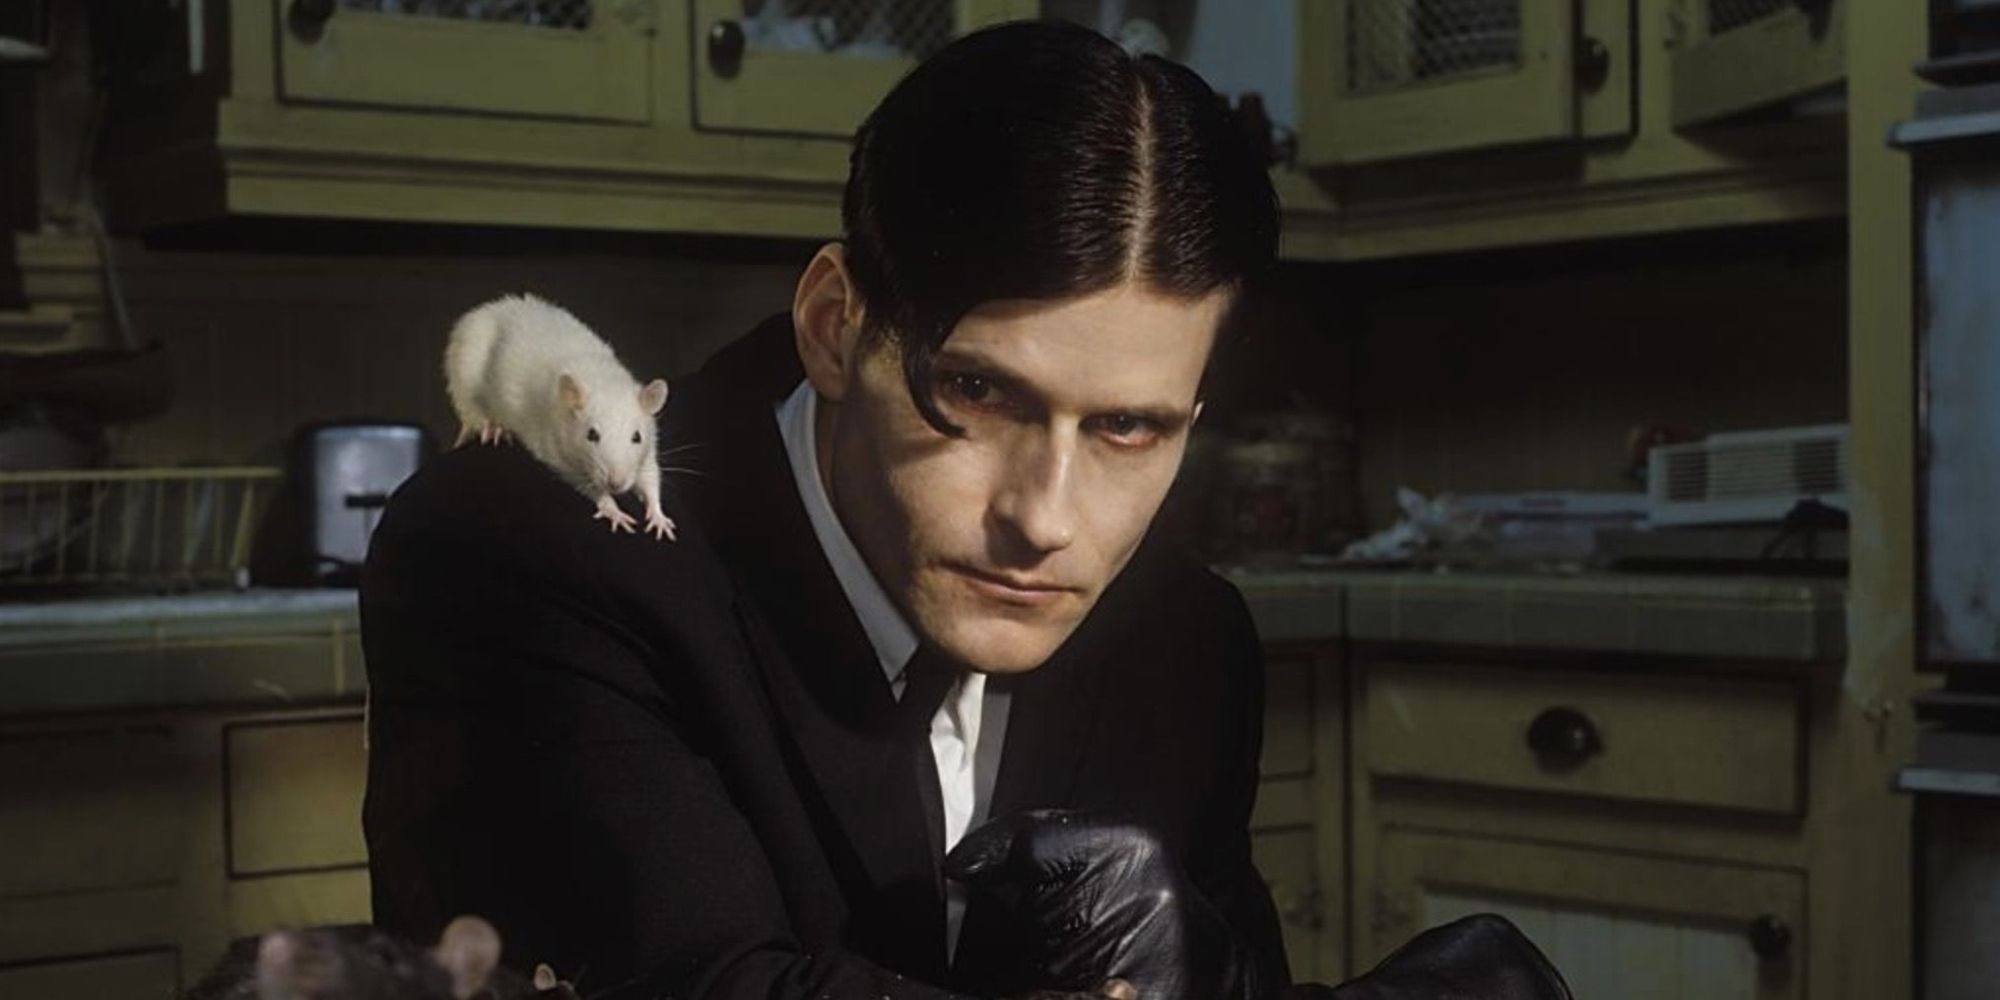 What Is Crispin Glover’s Net Worth?